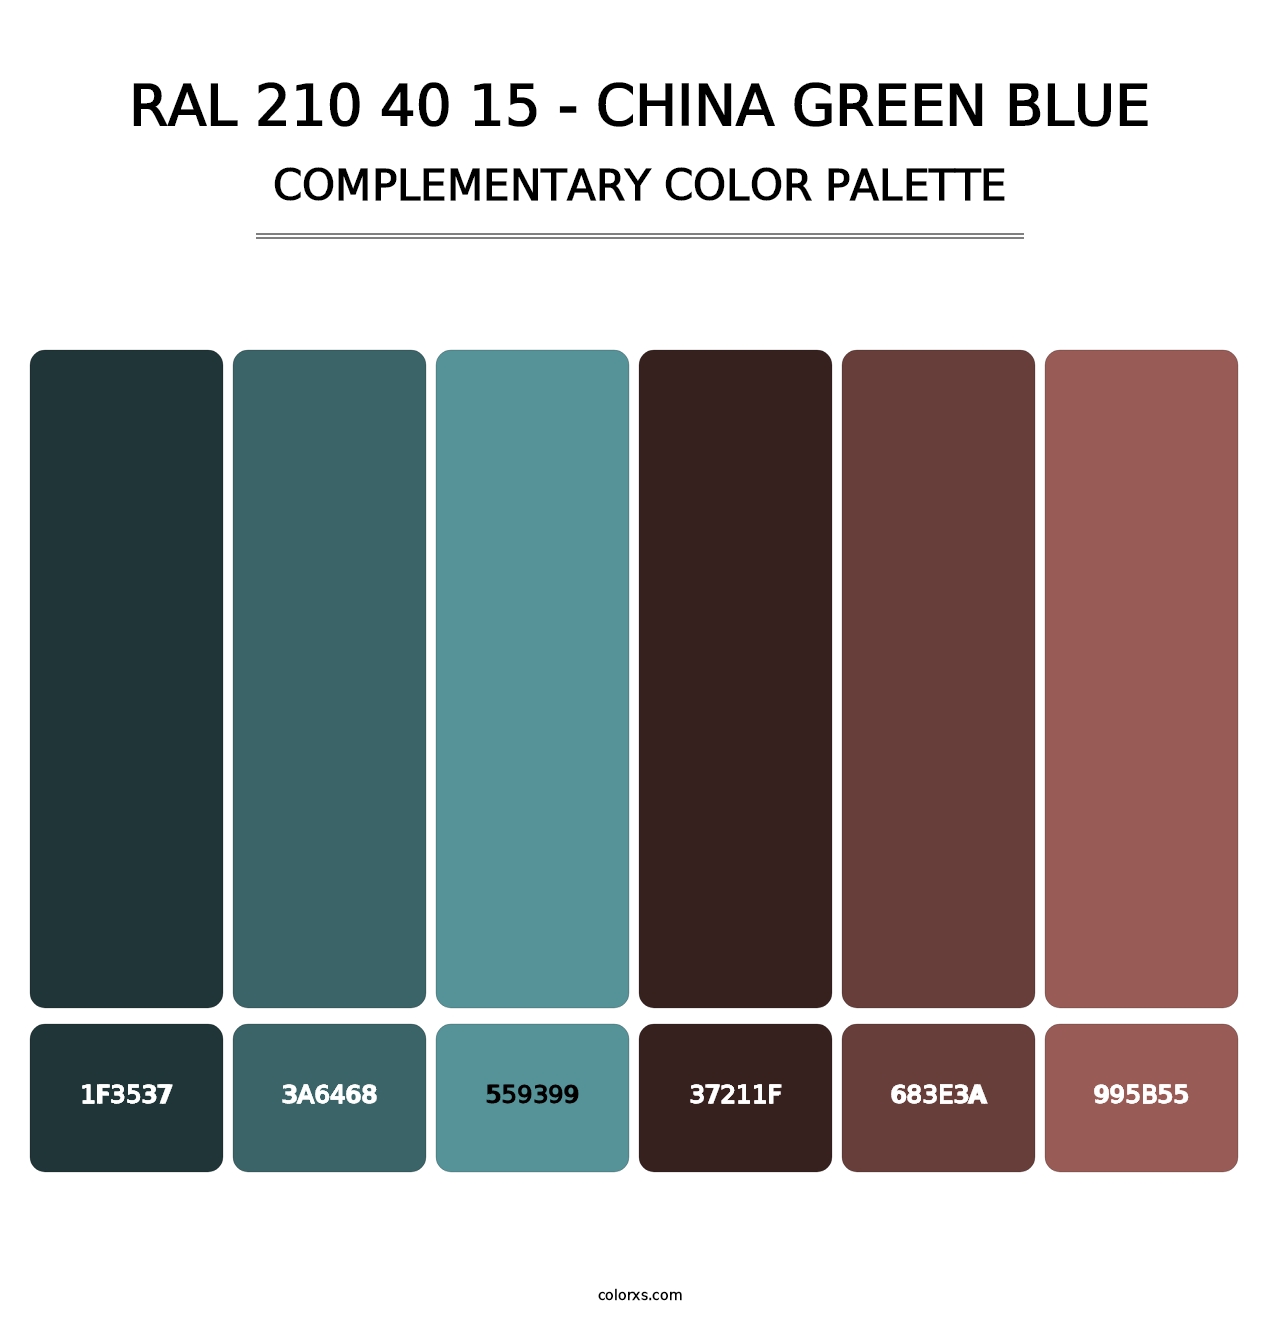 RAL 210 40 15 - China Green Blue - Complementary Color Palette